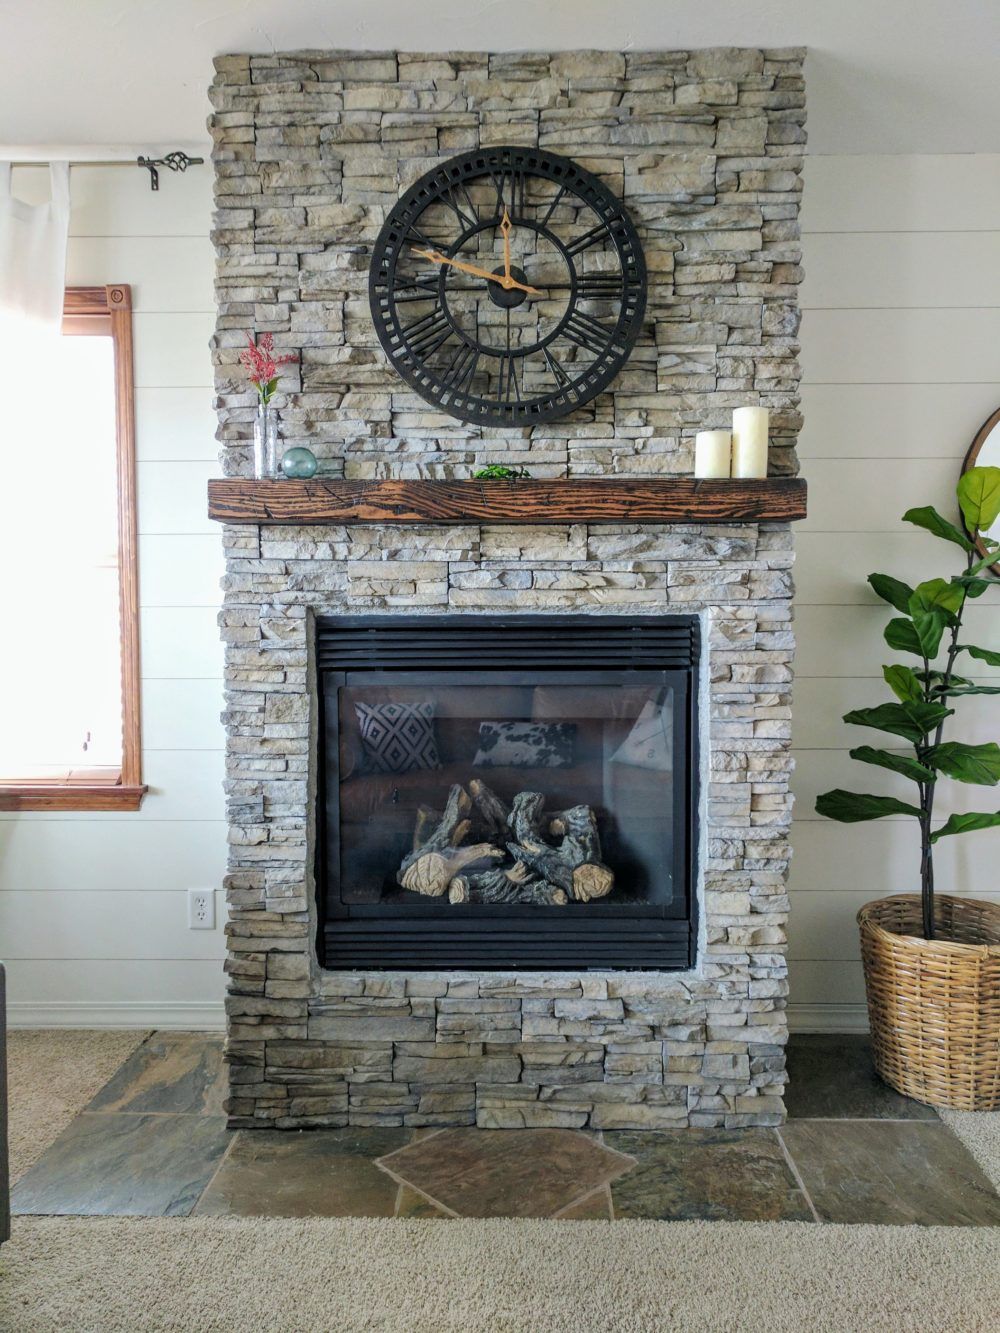 Clocks Over Fireplace Mantel Inspirational How to Make A Distressed Fireplace Mantel